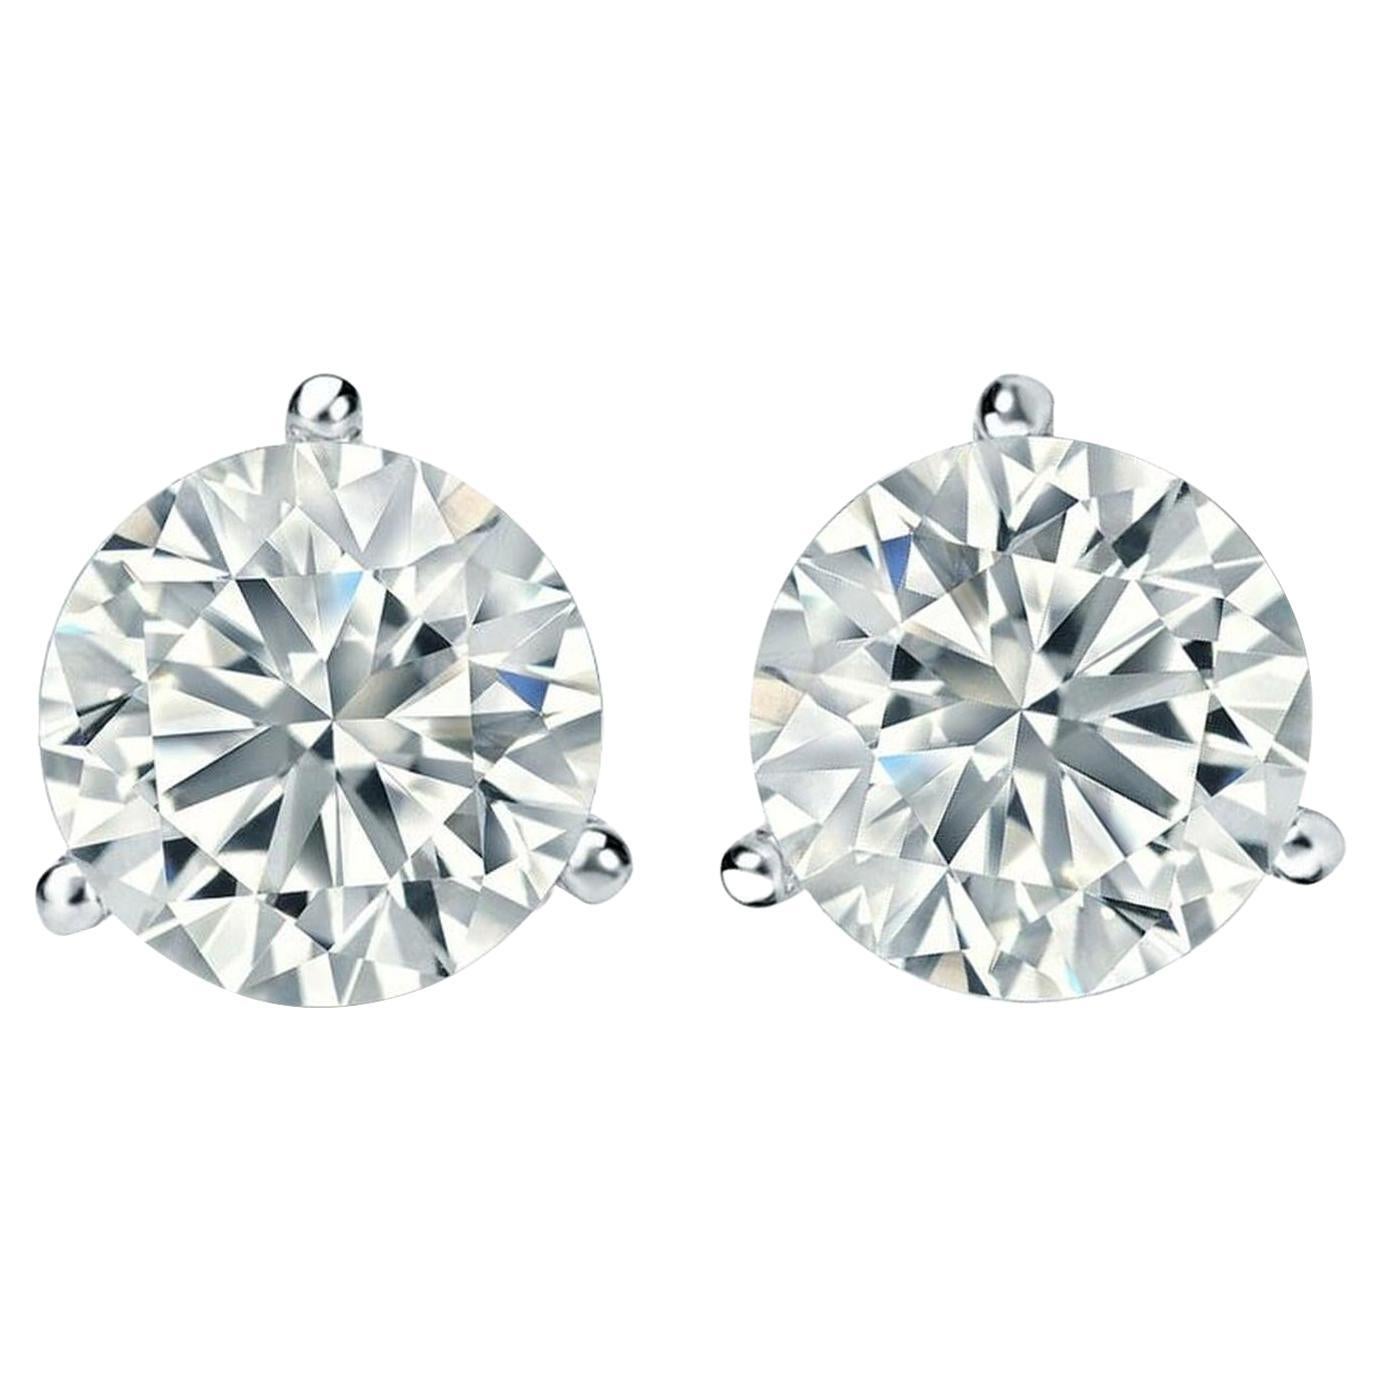 4.77ct Gia Certified Round Diamond Martini Setting 3 Prong Studs Earrings For Sale